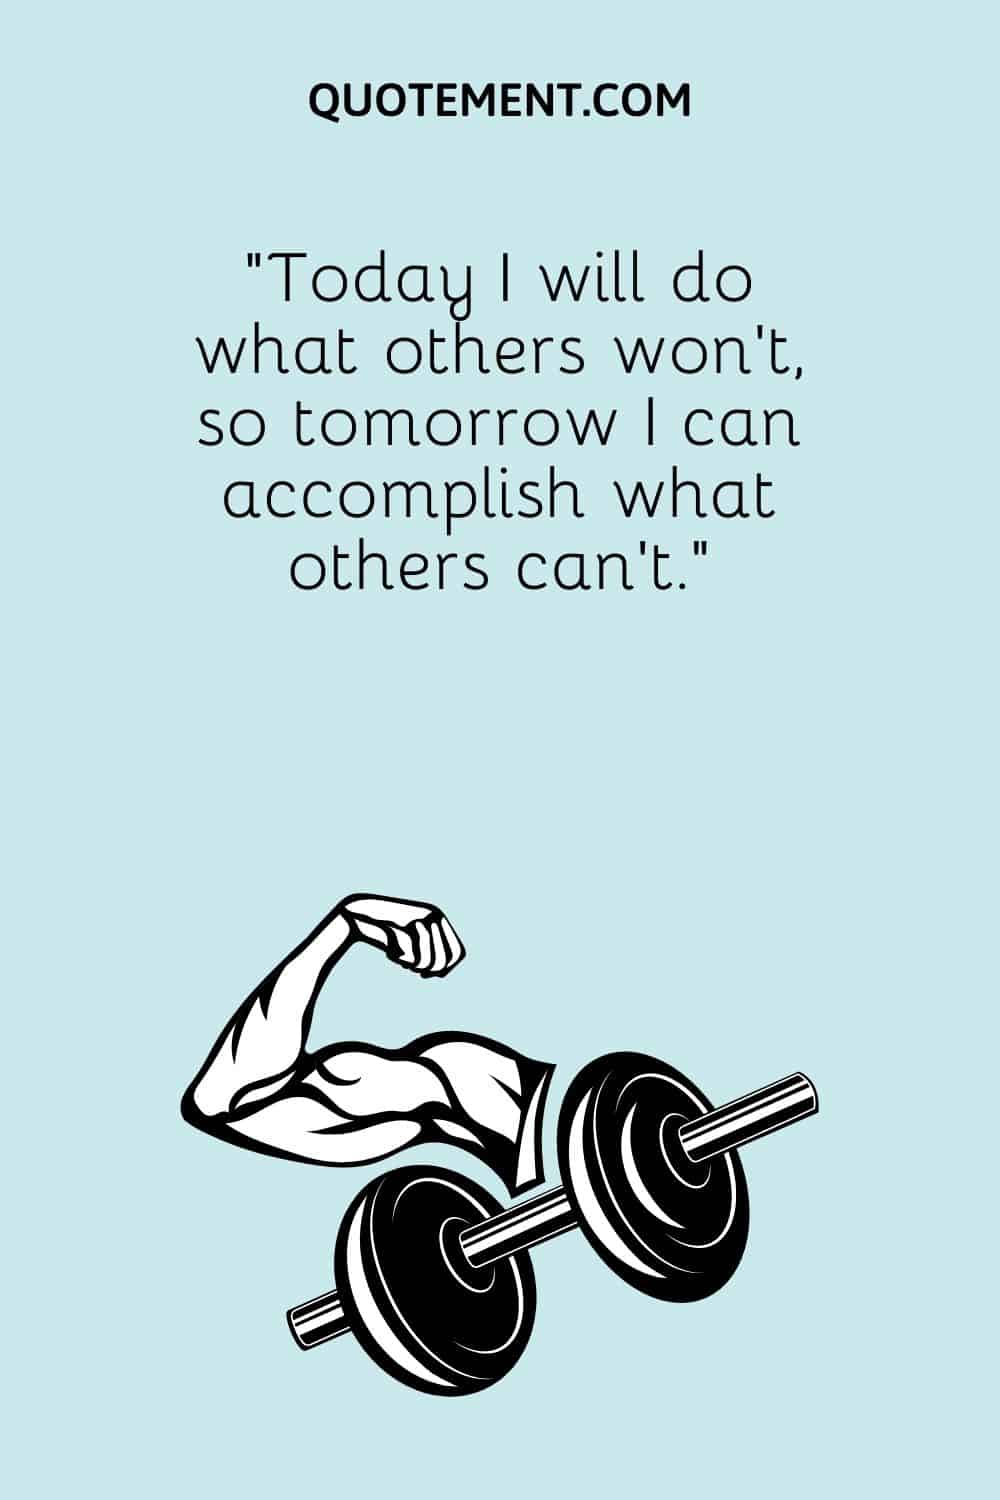 “Today I will do what others won’t, so tomorrow I can accomplish what others can’t.”